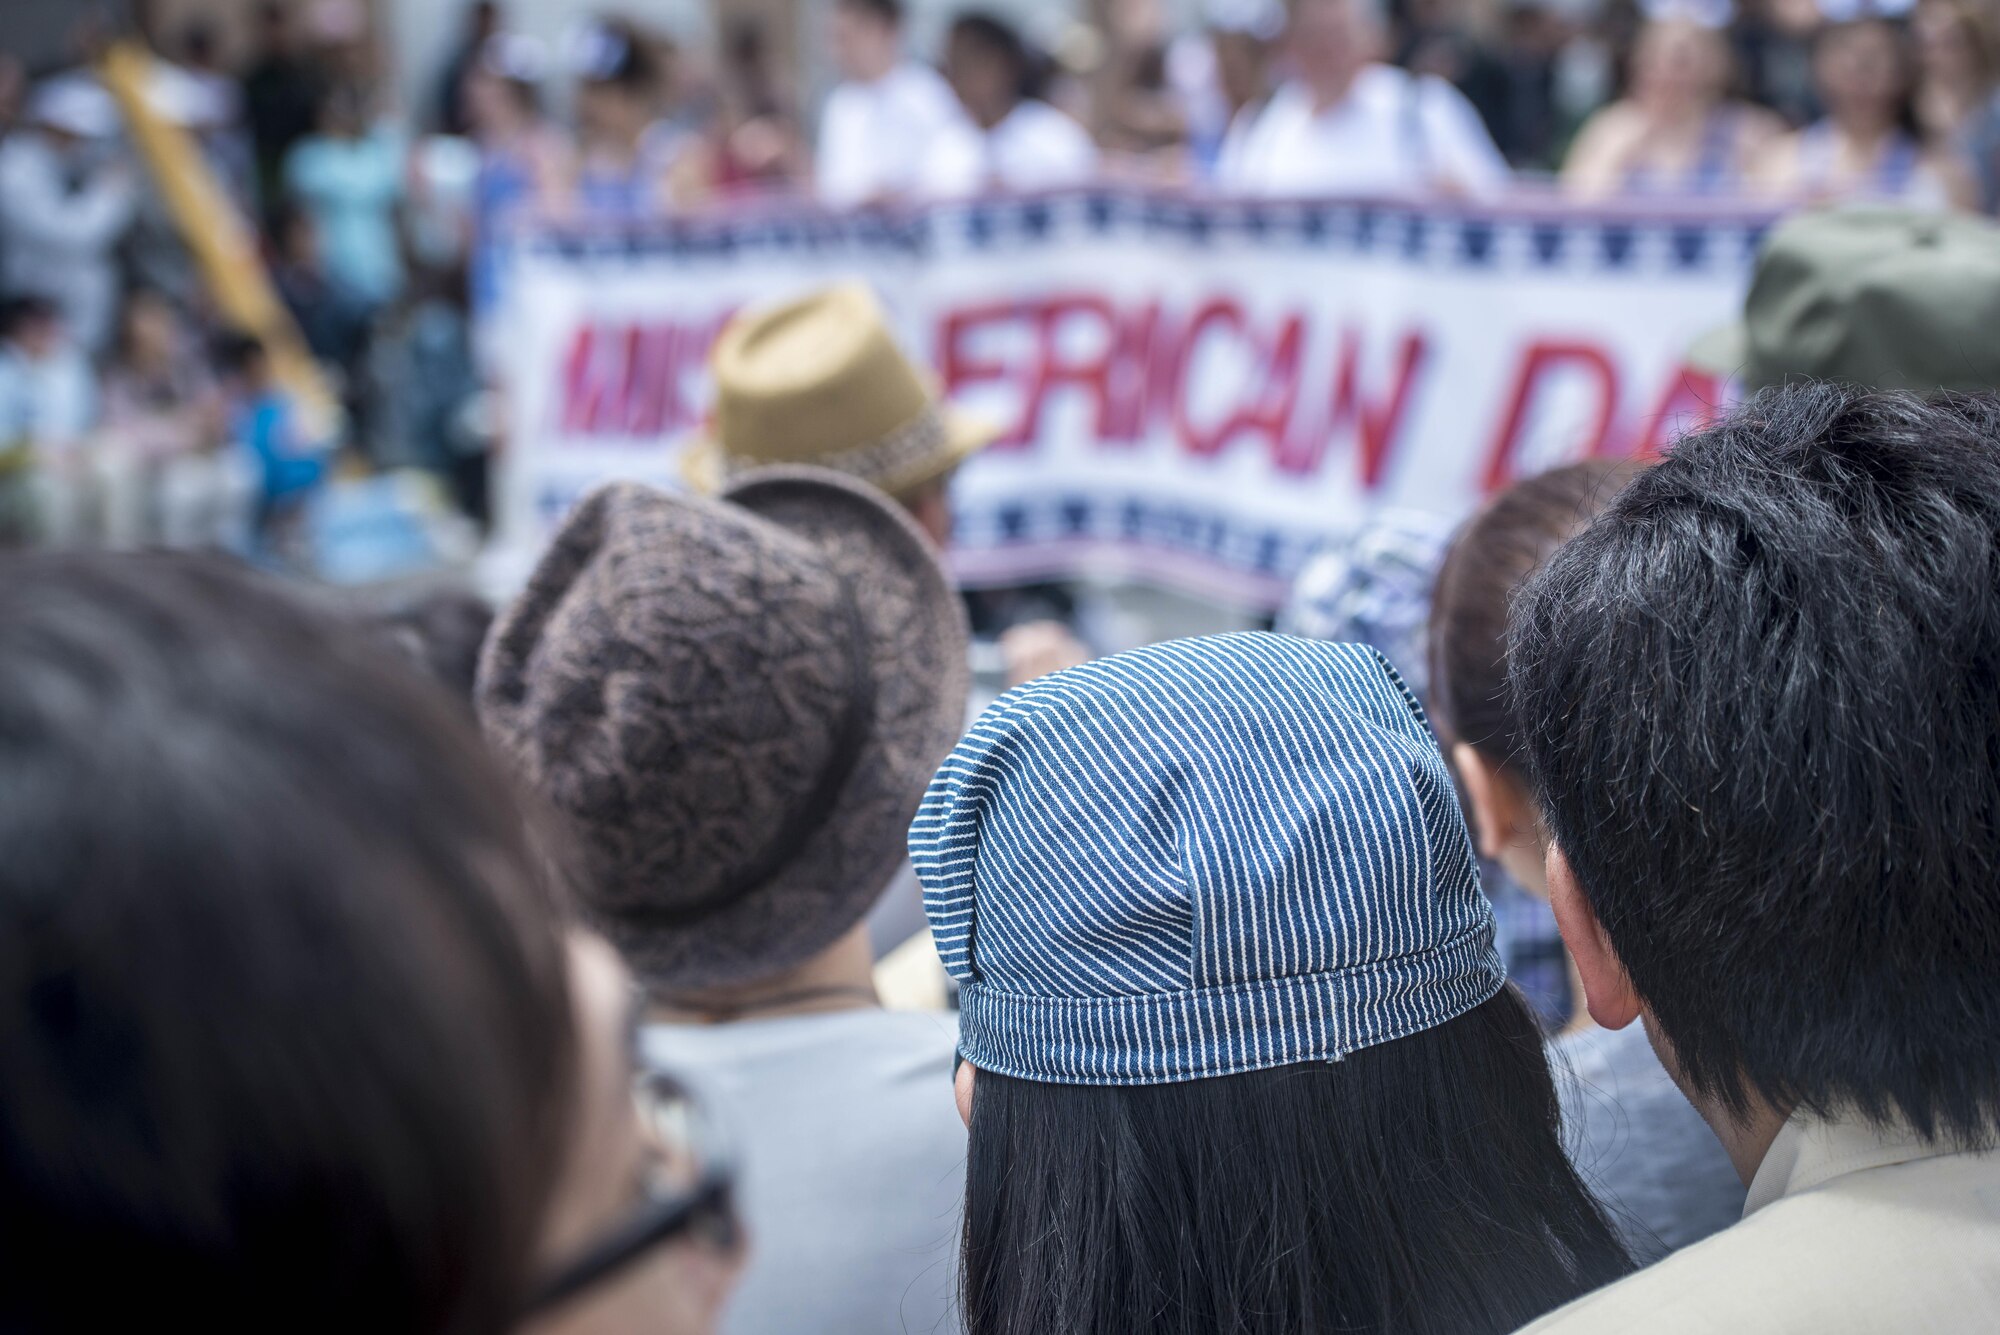 Japanese and Americans line the street, shoulder-to-shoulder, watching as the 28th Annual American Day parade banner marches past in Misawa City, Japan, June 5, 2016. Events like these are important as they afford Misawa neighbors, American and Japanese alike, opportunities to interact in a relaxed environment specifically planned for building friendships. More than 80,000 attendees from across the Aomori Prefecture traveled to Misawa City to enjoy American and Japanese culture. (U.S. Air Force photo by Staff Sgt. Benjamin W. Stratton)